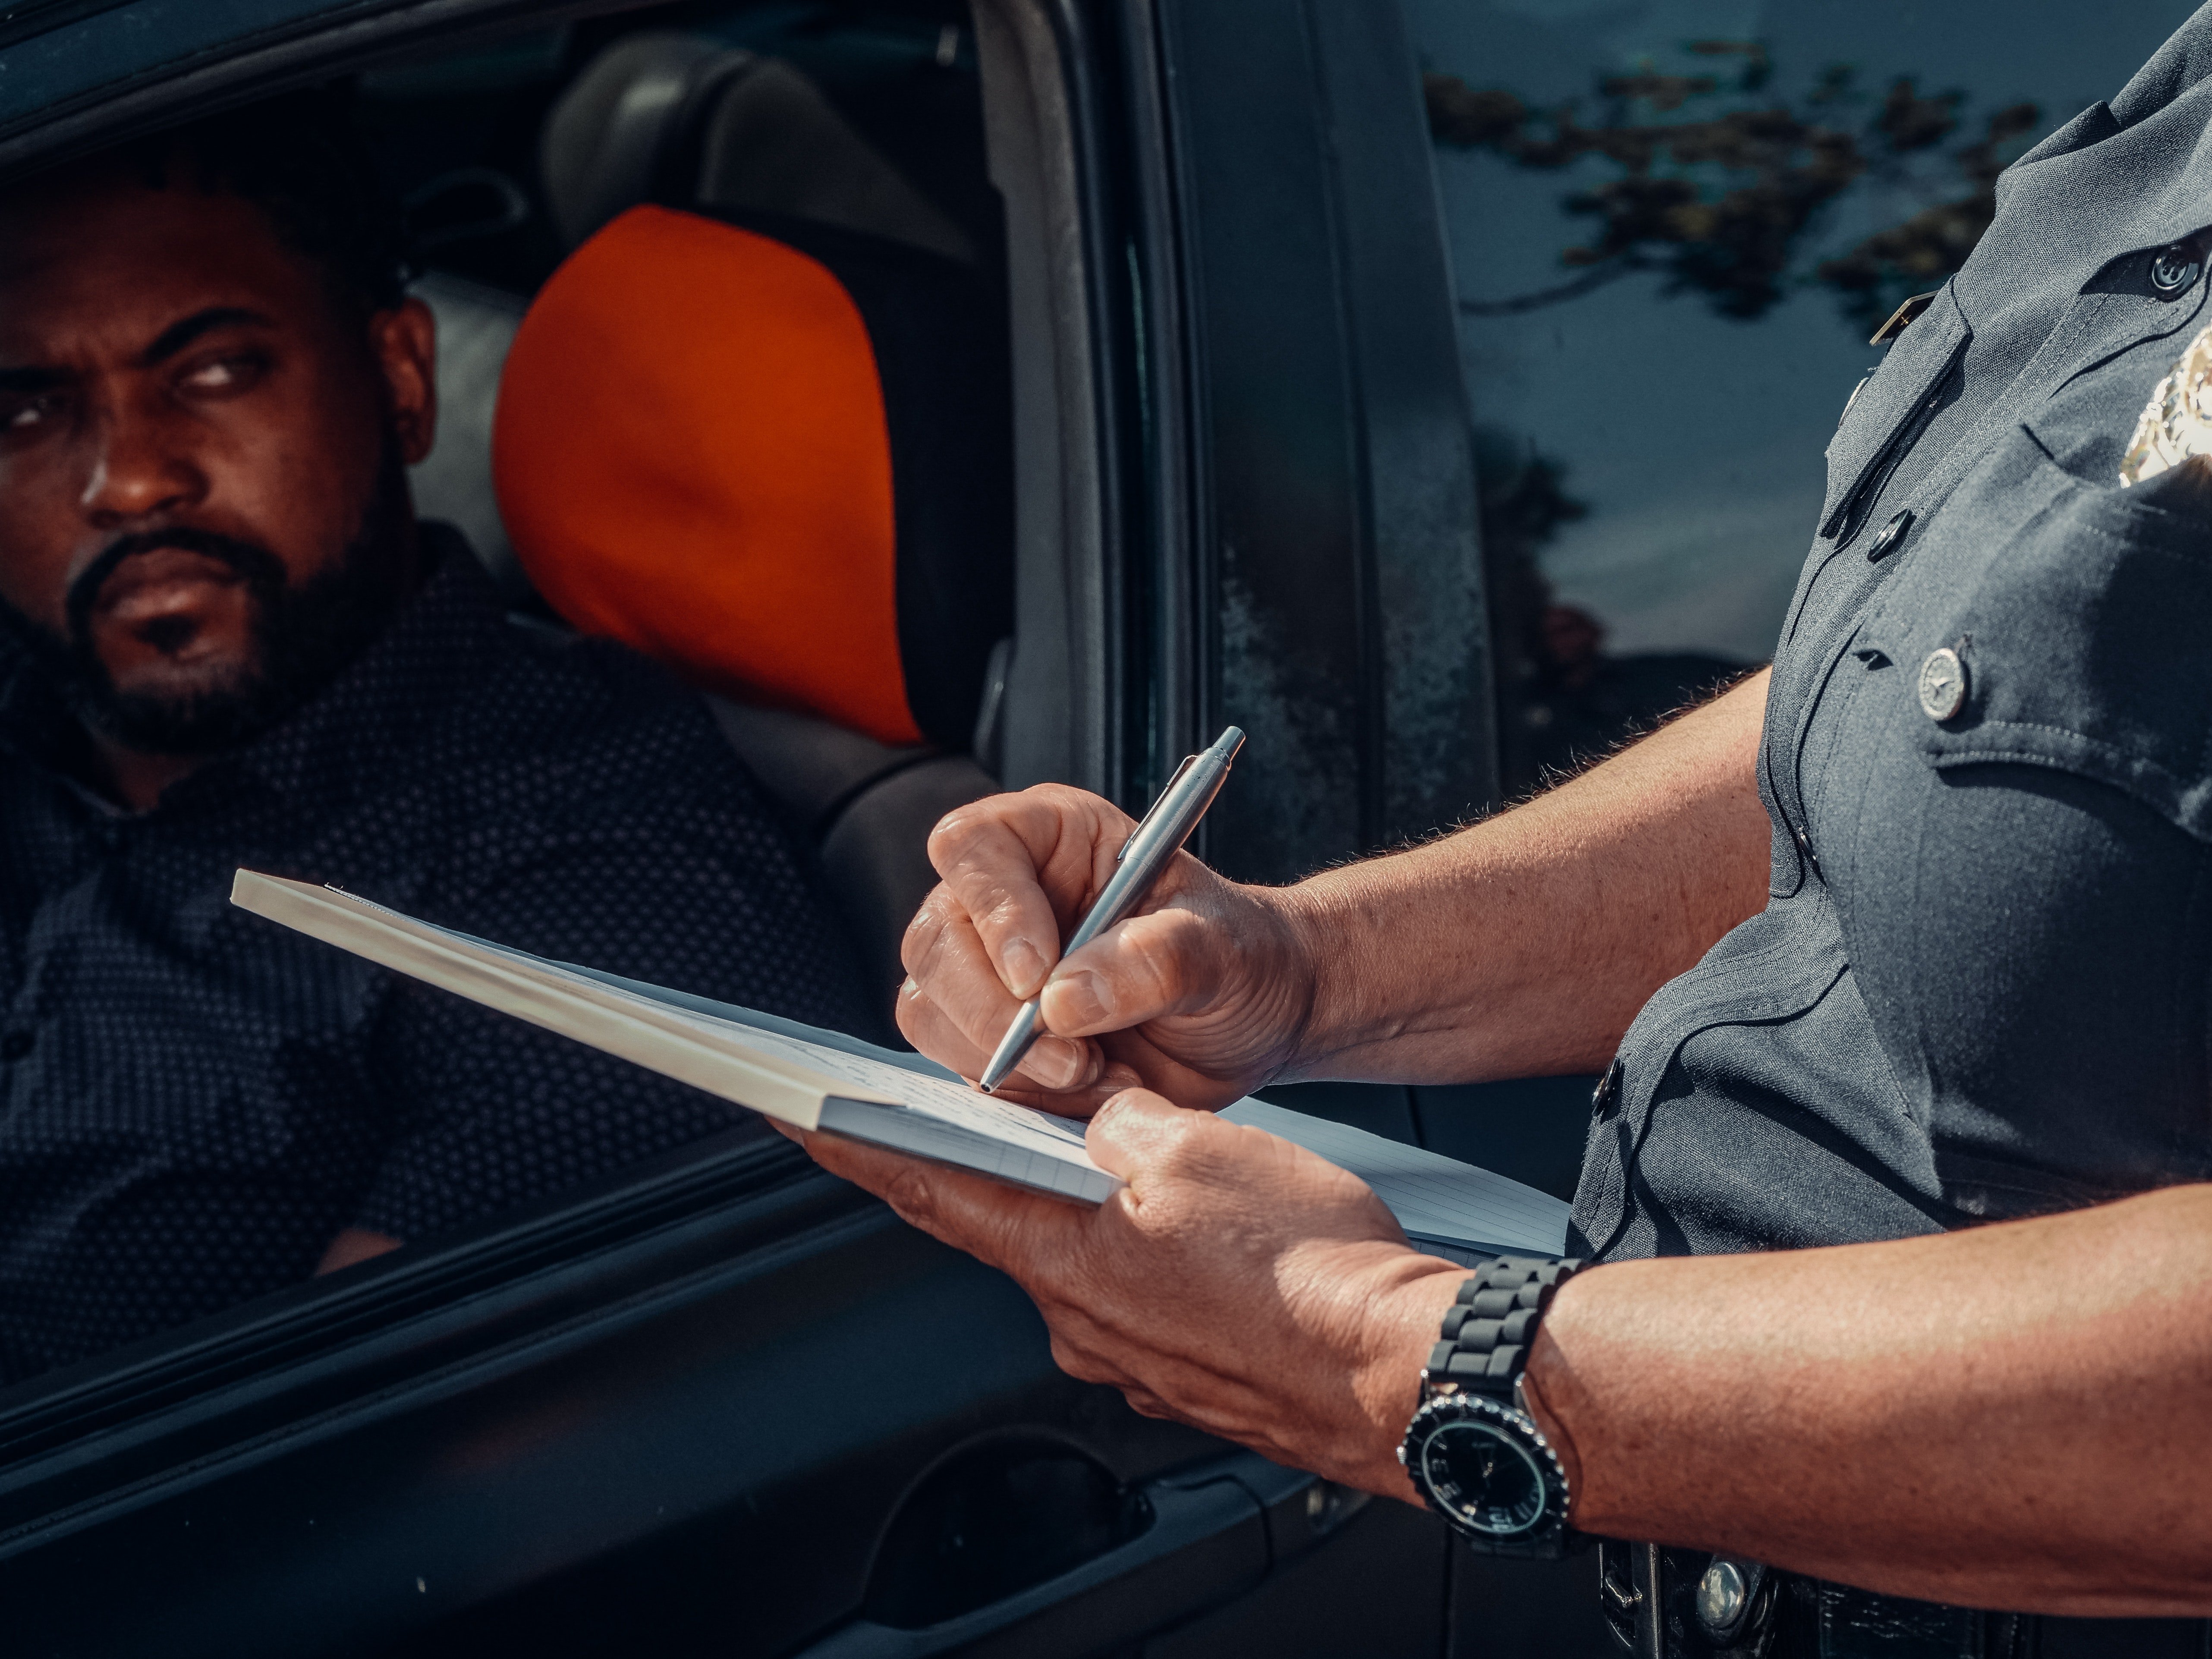 The police officer writing a ticket for the driver | Photo: Pexels/Kindel Media